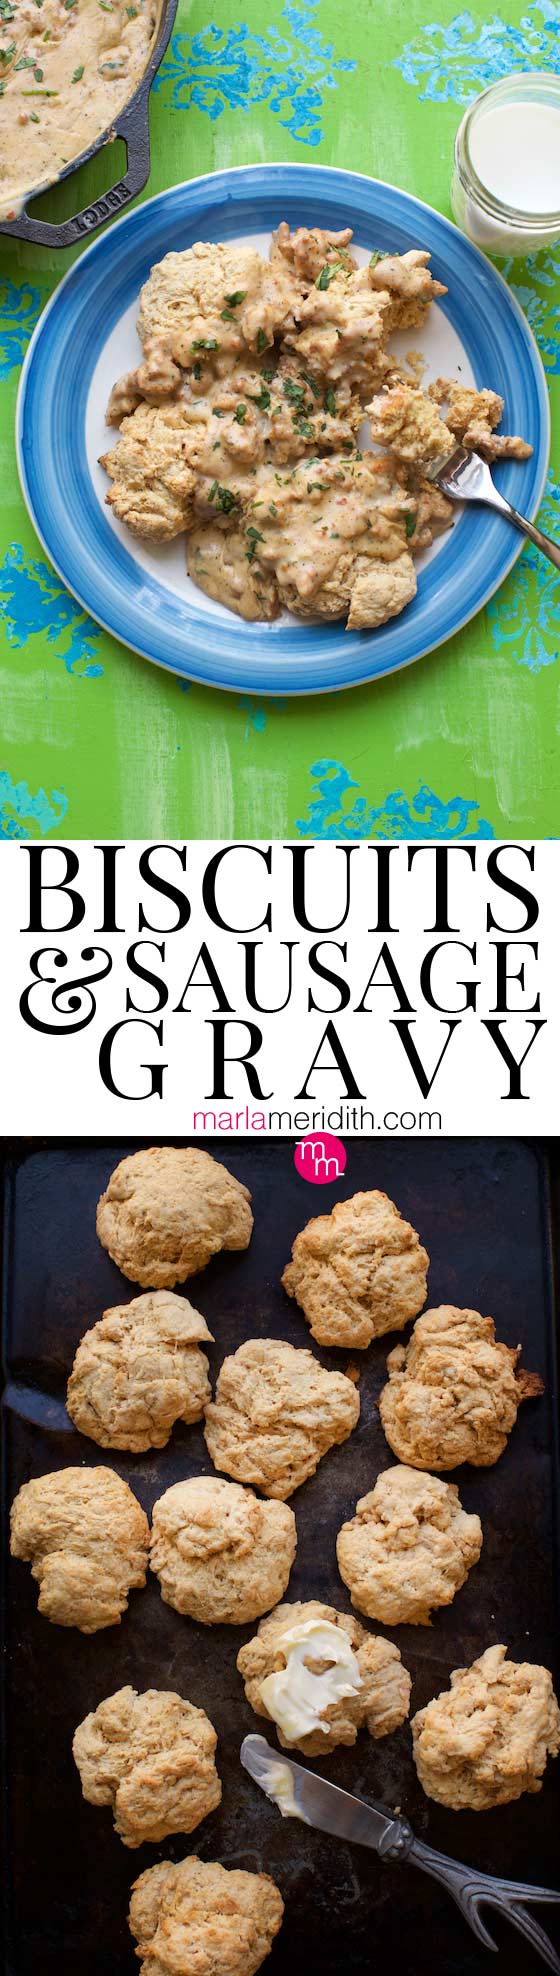 The BEST Biscuits and Gravy recipe ever! MarlaMeridith.com #recipe #breakfast